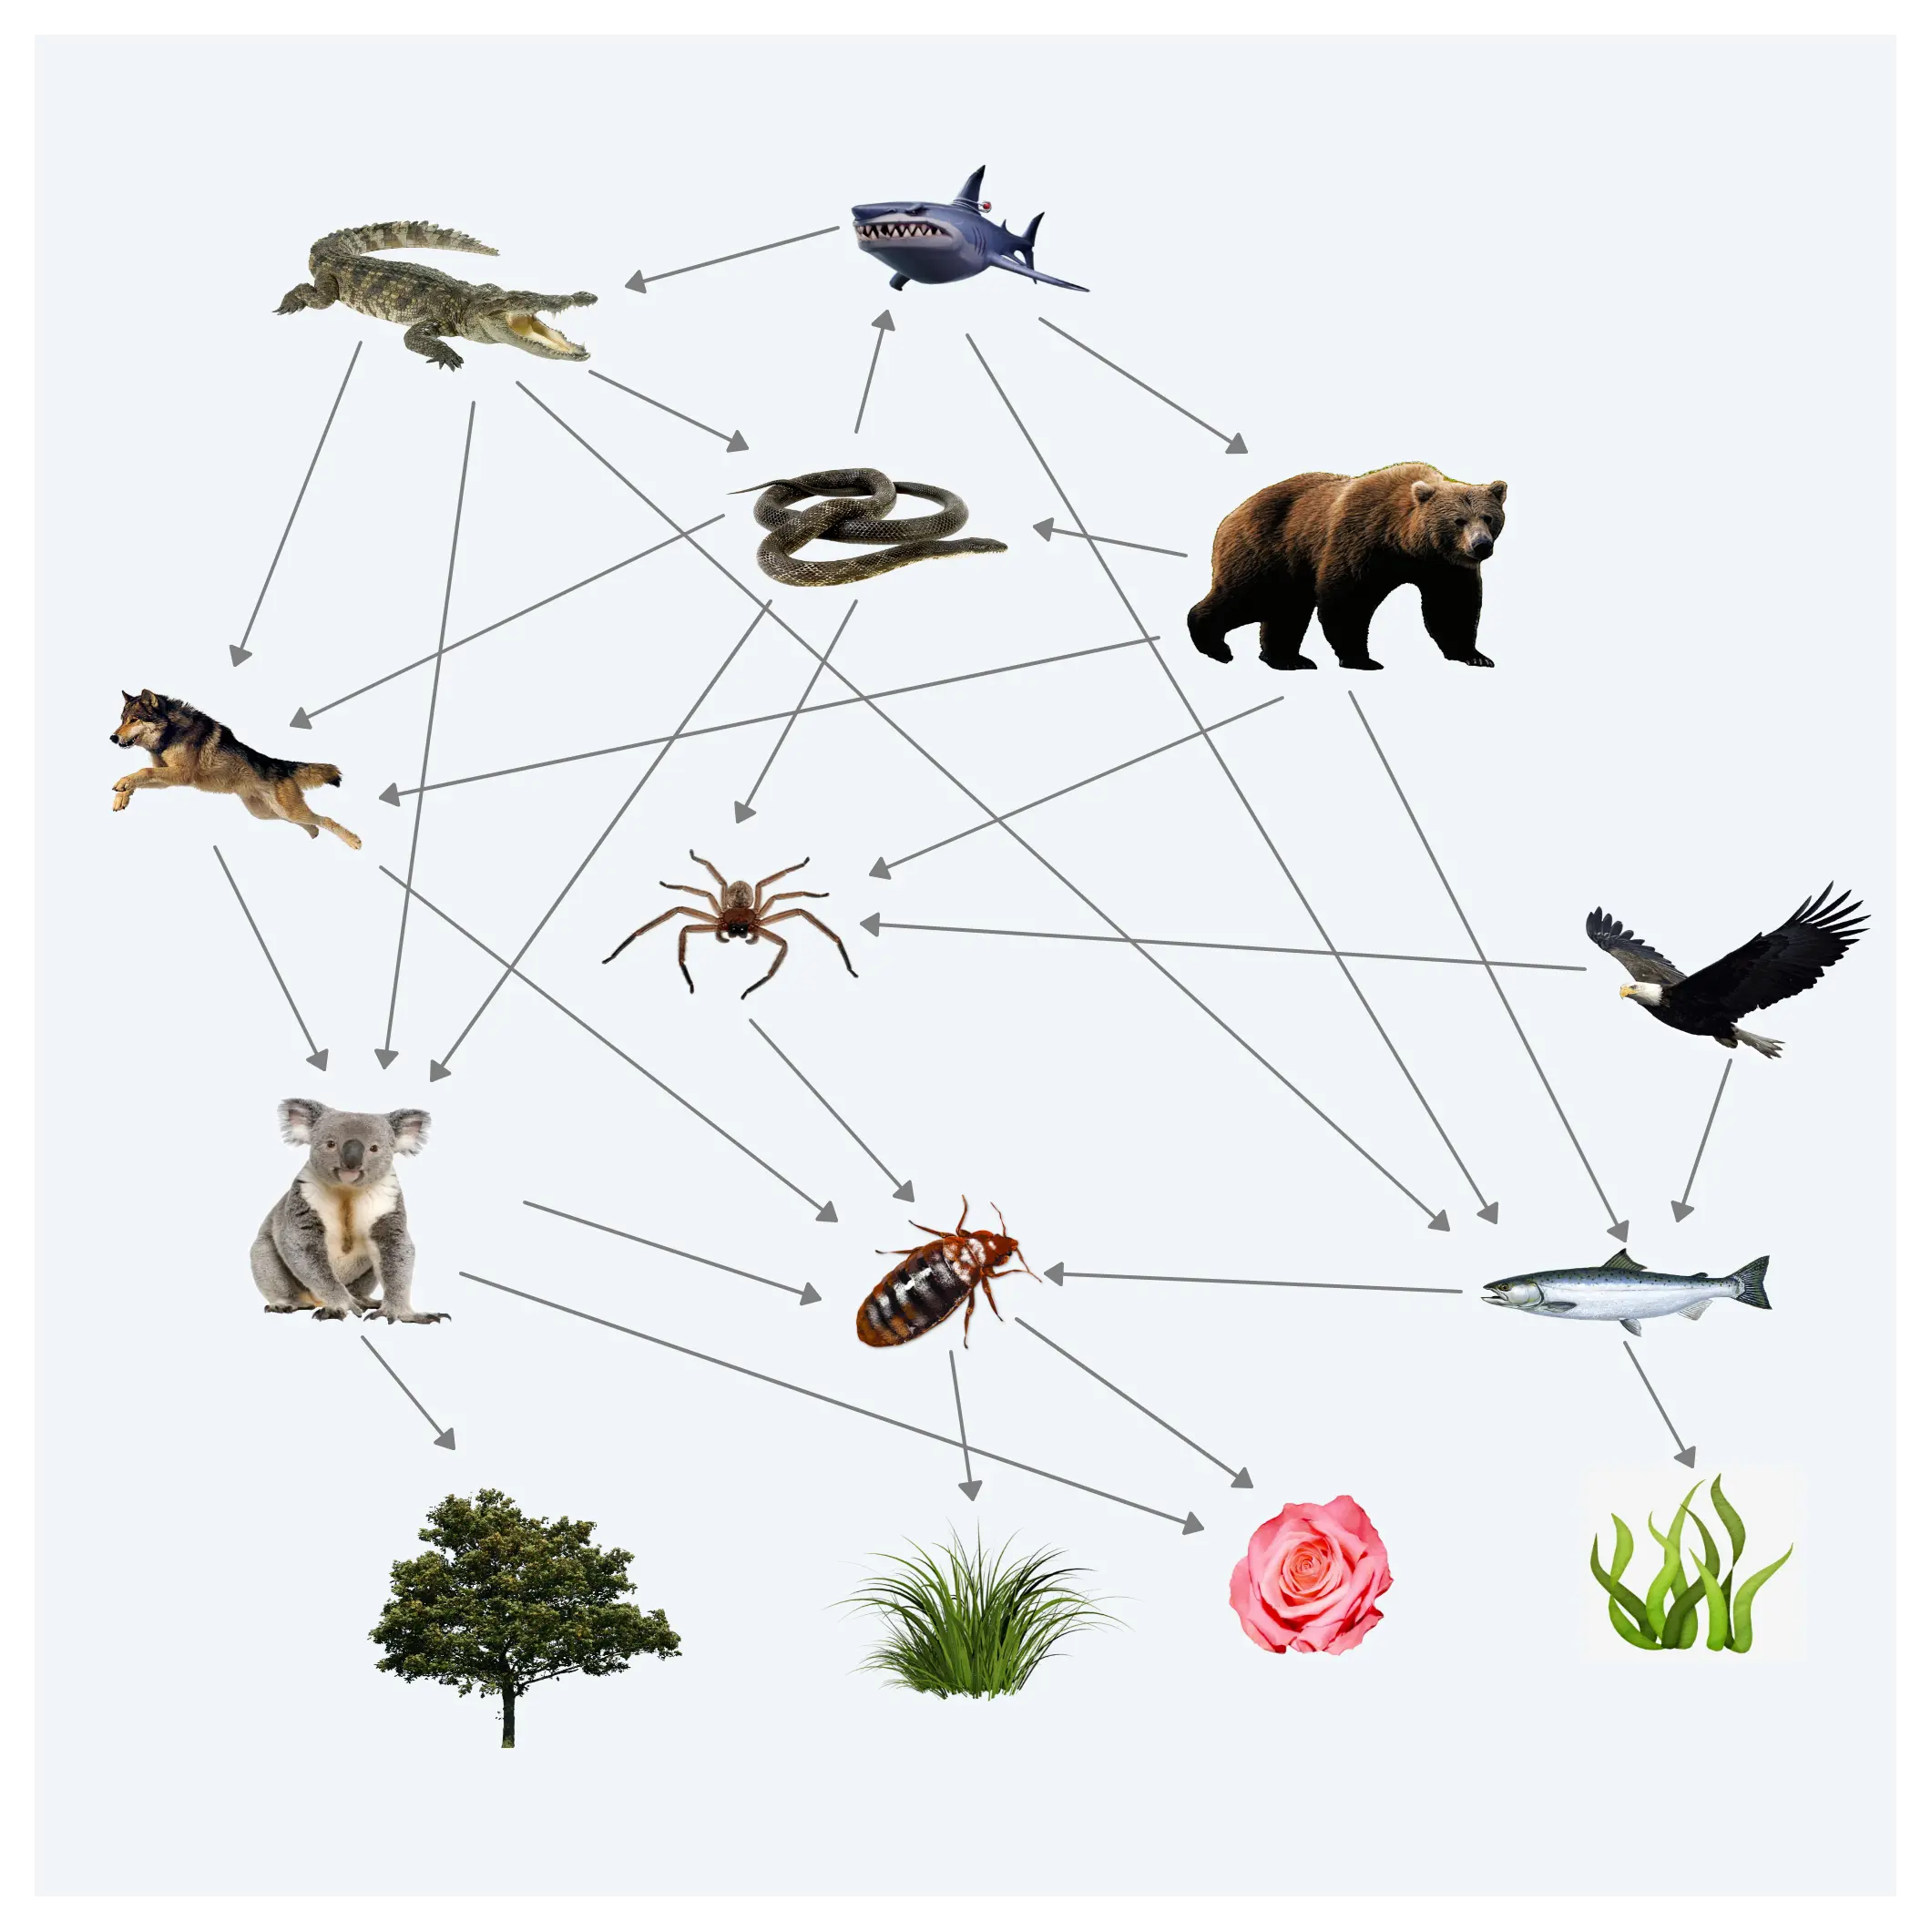 Food Web - Graphic Organizers for Writing